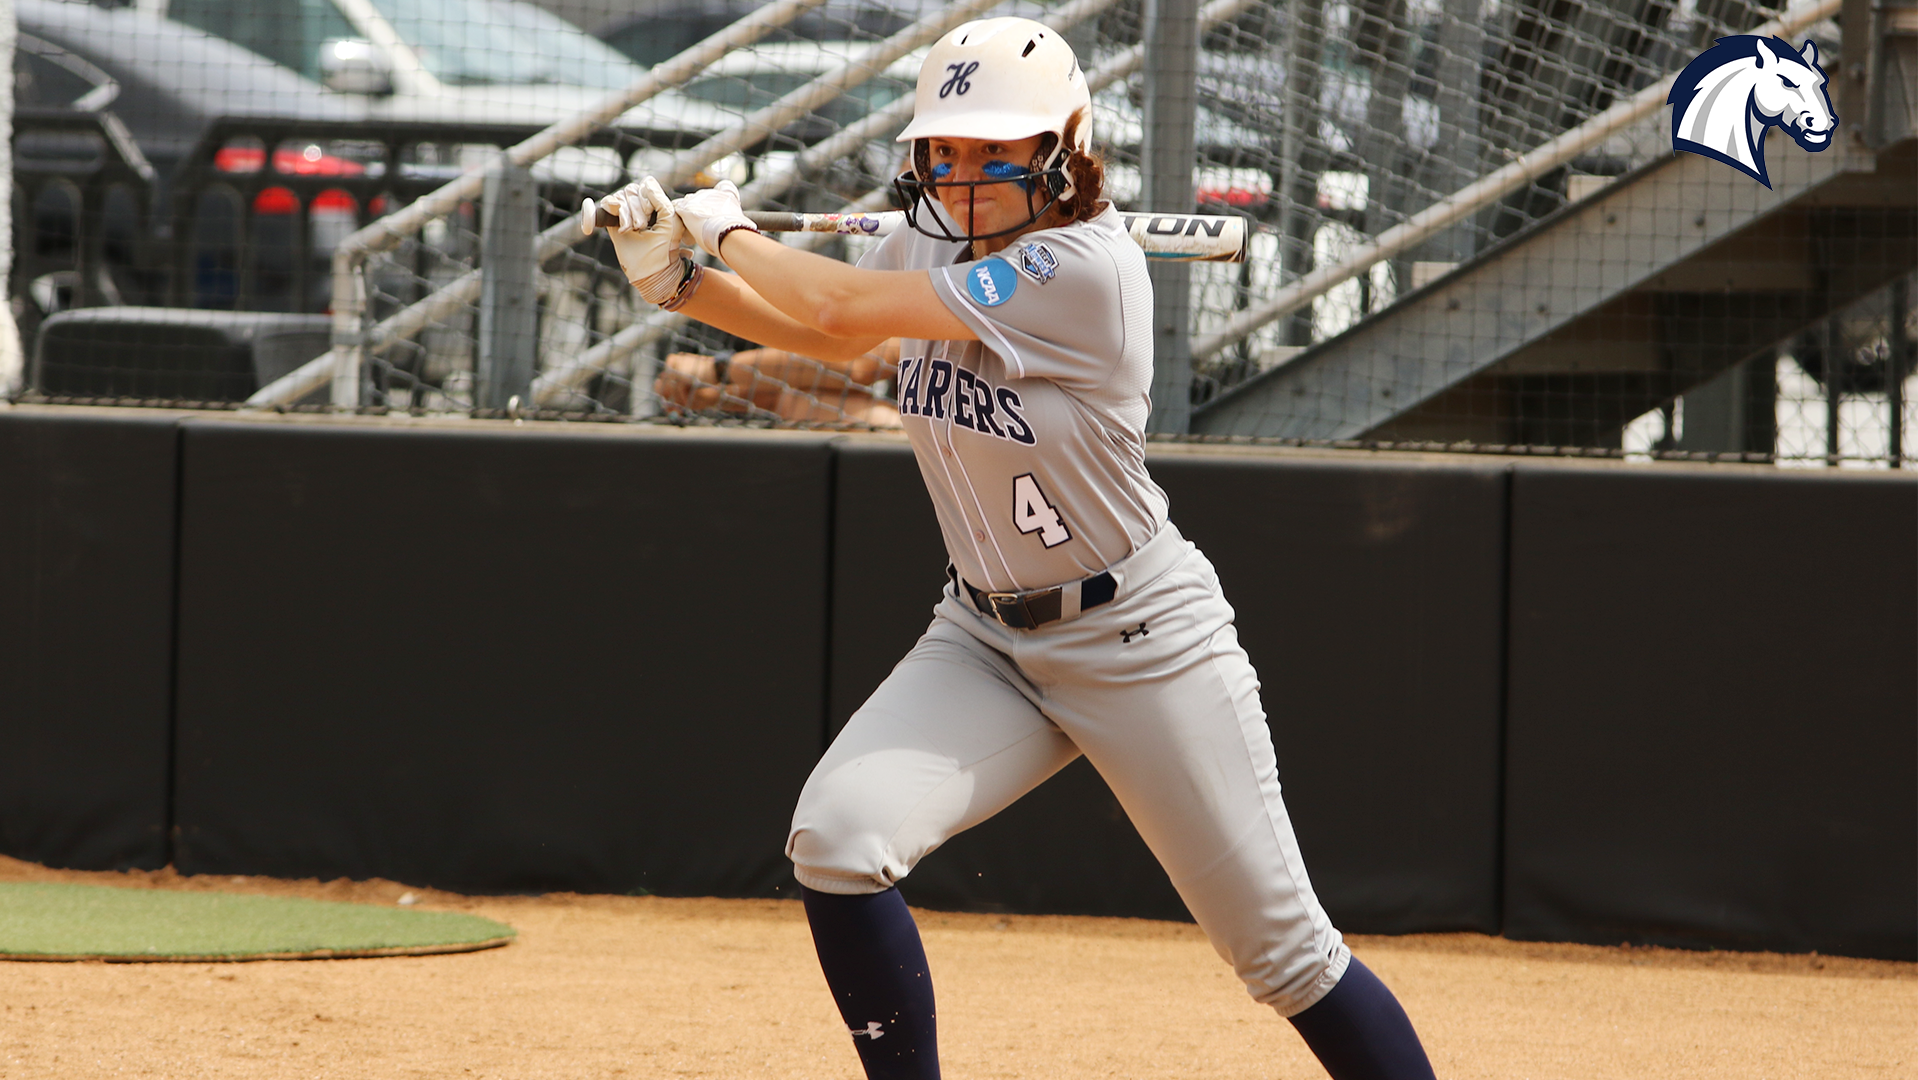 Chargers' impressive season ends in NCAA Regional loss to Illinois-Springfield, 5-0